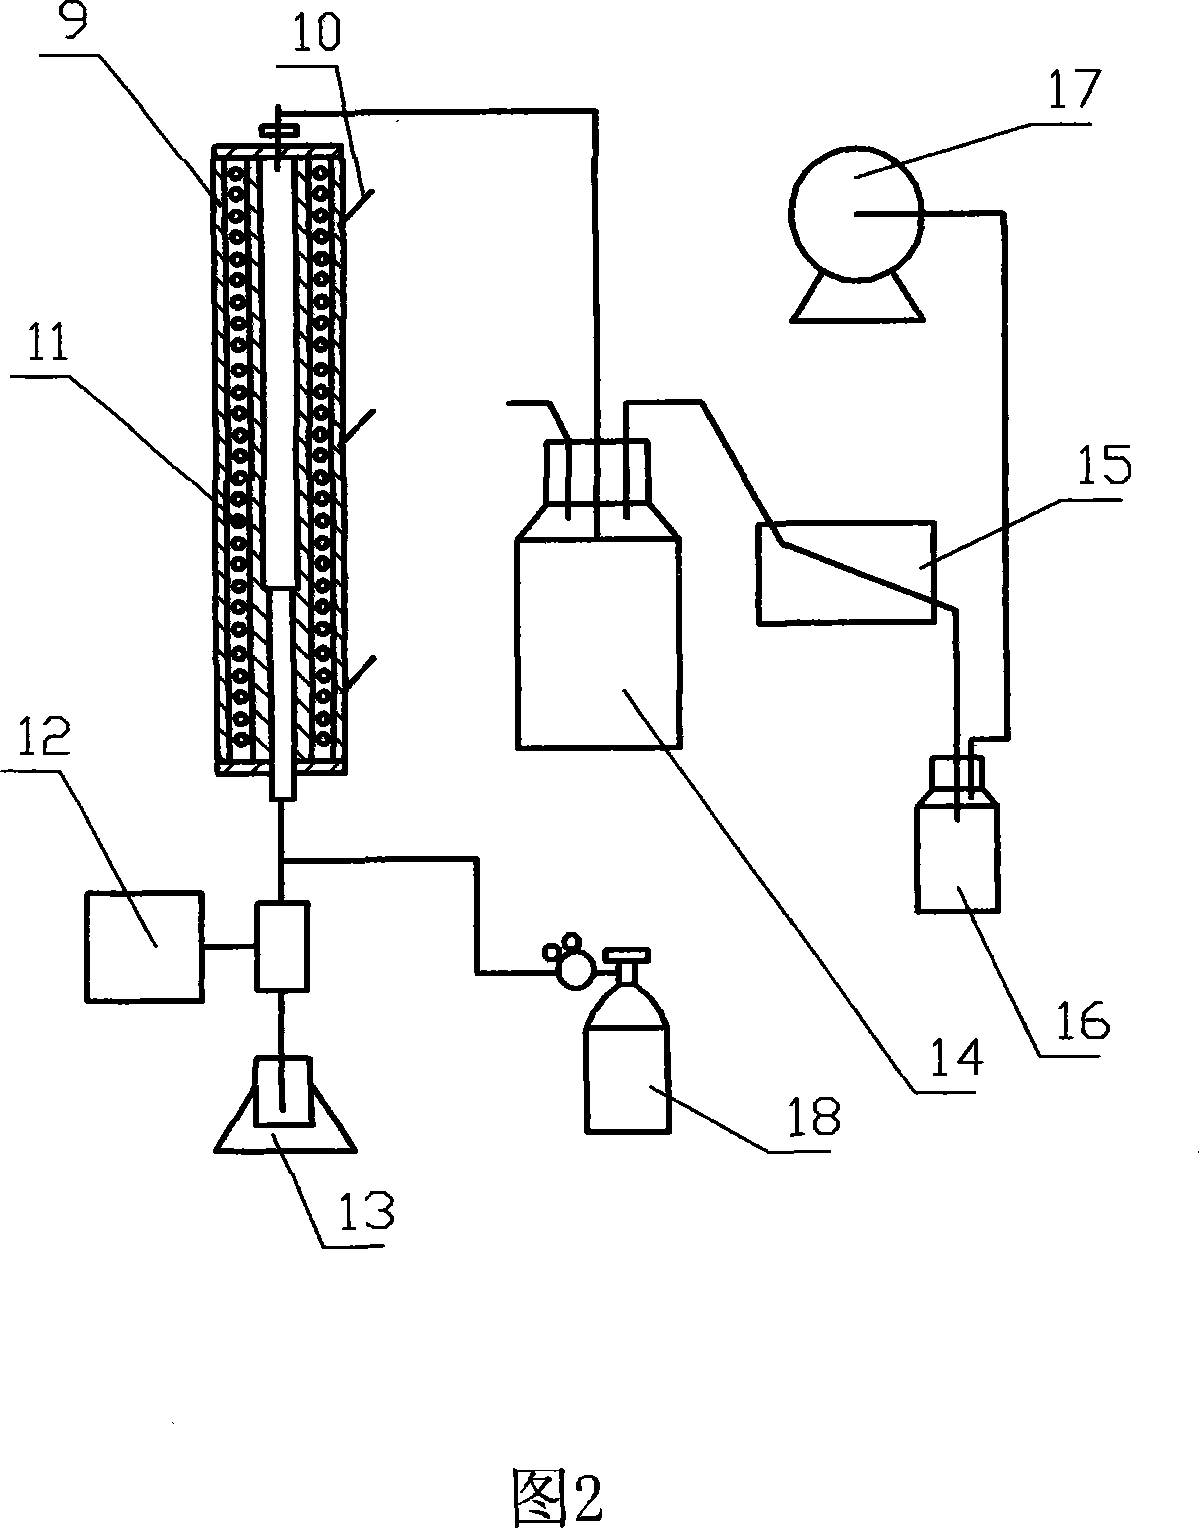 Adding substance for reducing furnace tube deposition coking and improving liquid yield of delayed coker